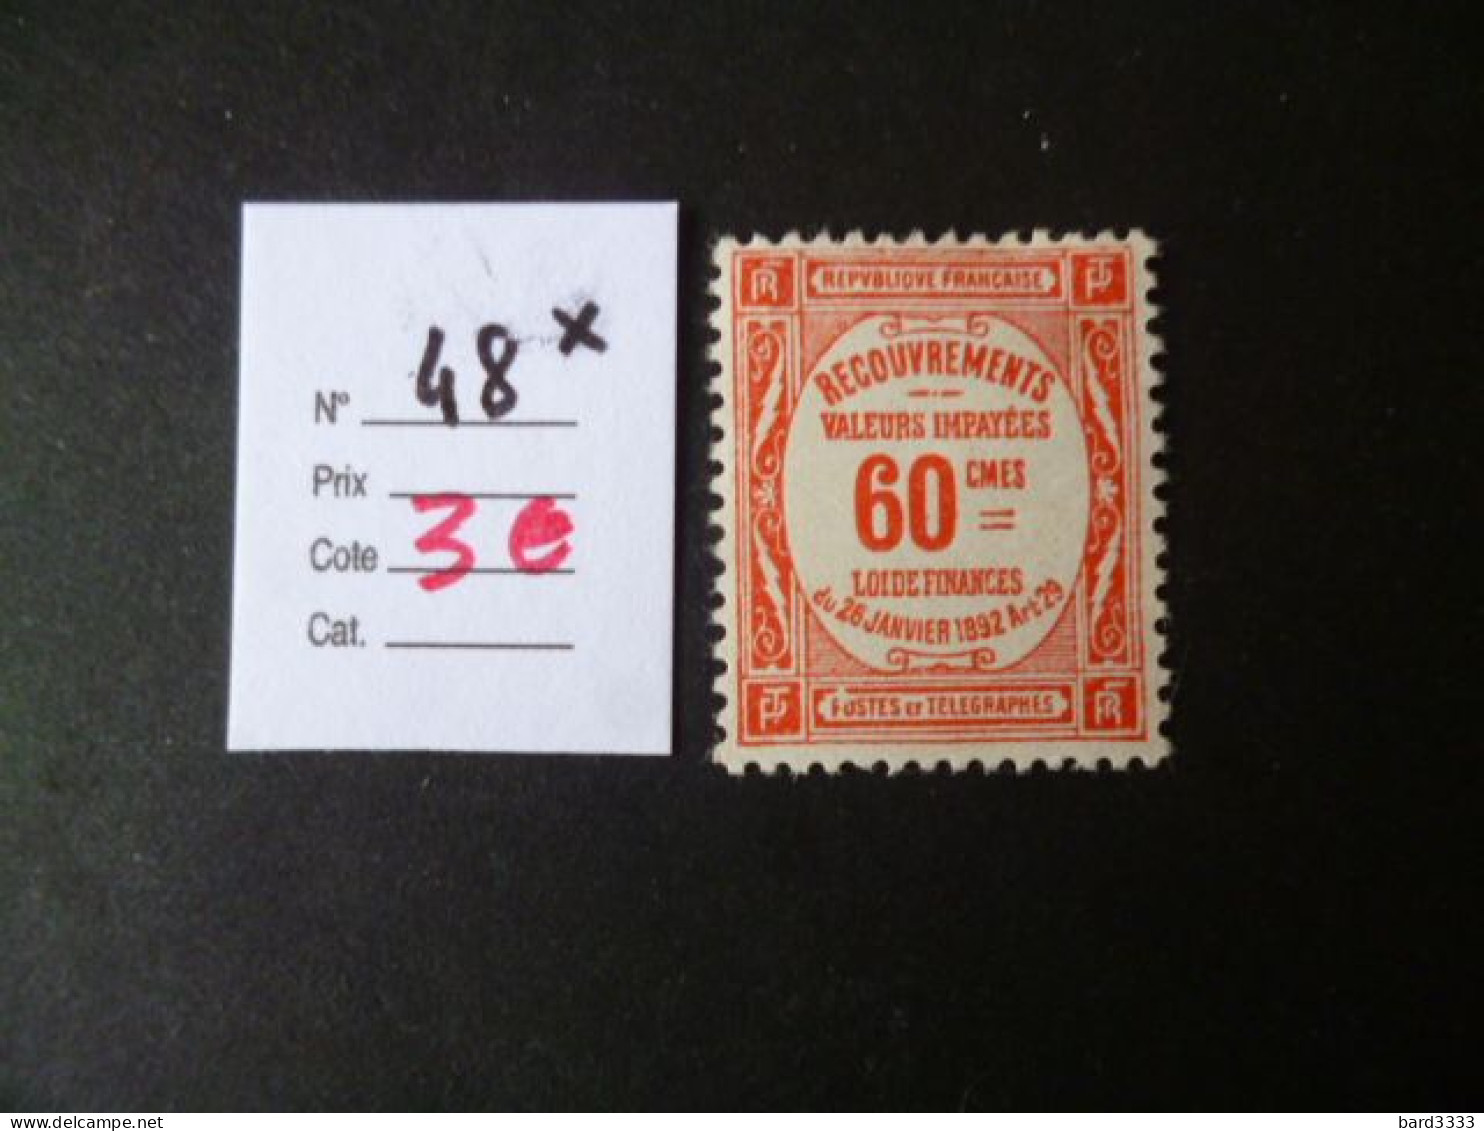 Timbre France Neuf * Taxe N° 48 Cote 3 € - 1859-1959 Neufs